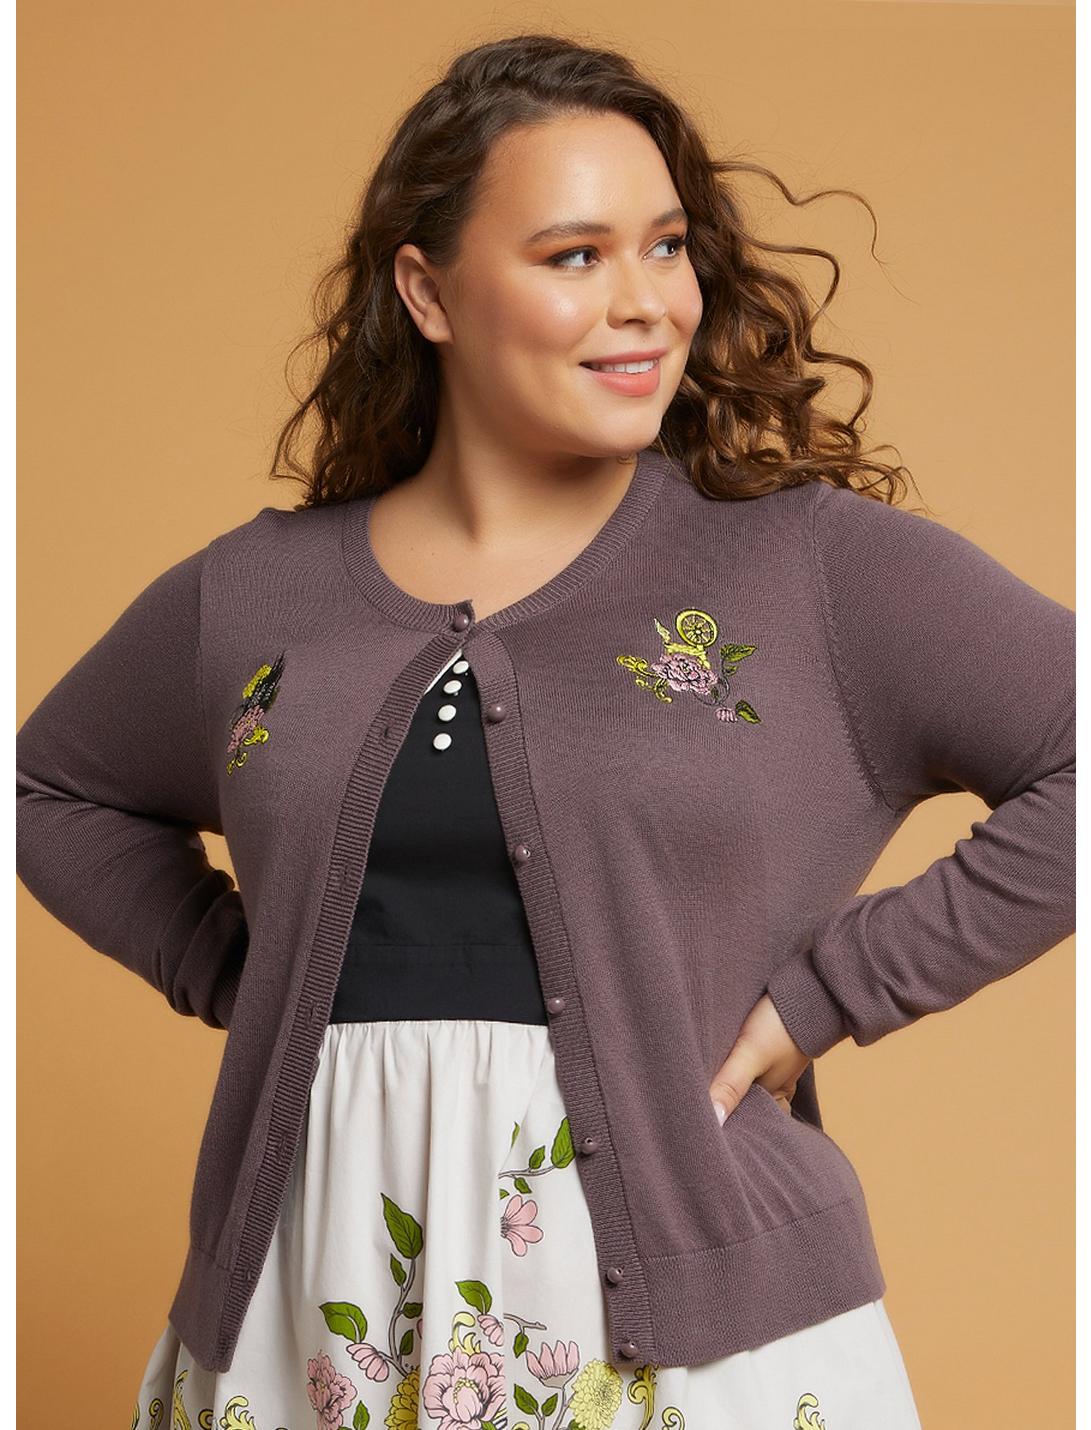 Her Universe Disney Sleeping Beauty Embroidered Girls Crop Cardigan Plus Size, BROWN, hi-res